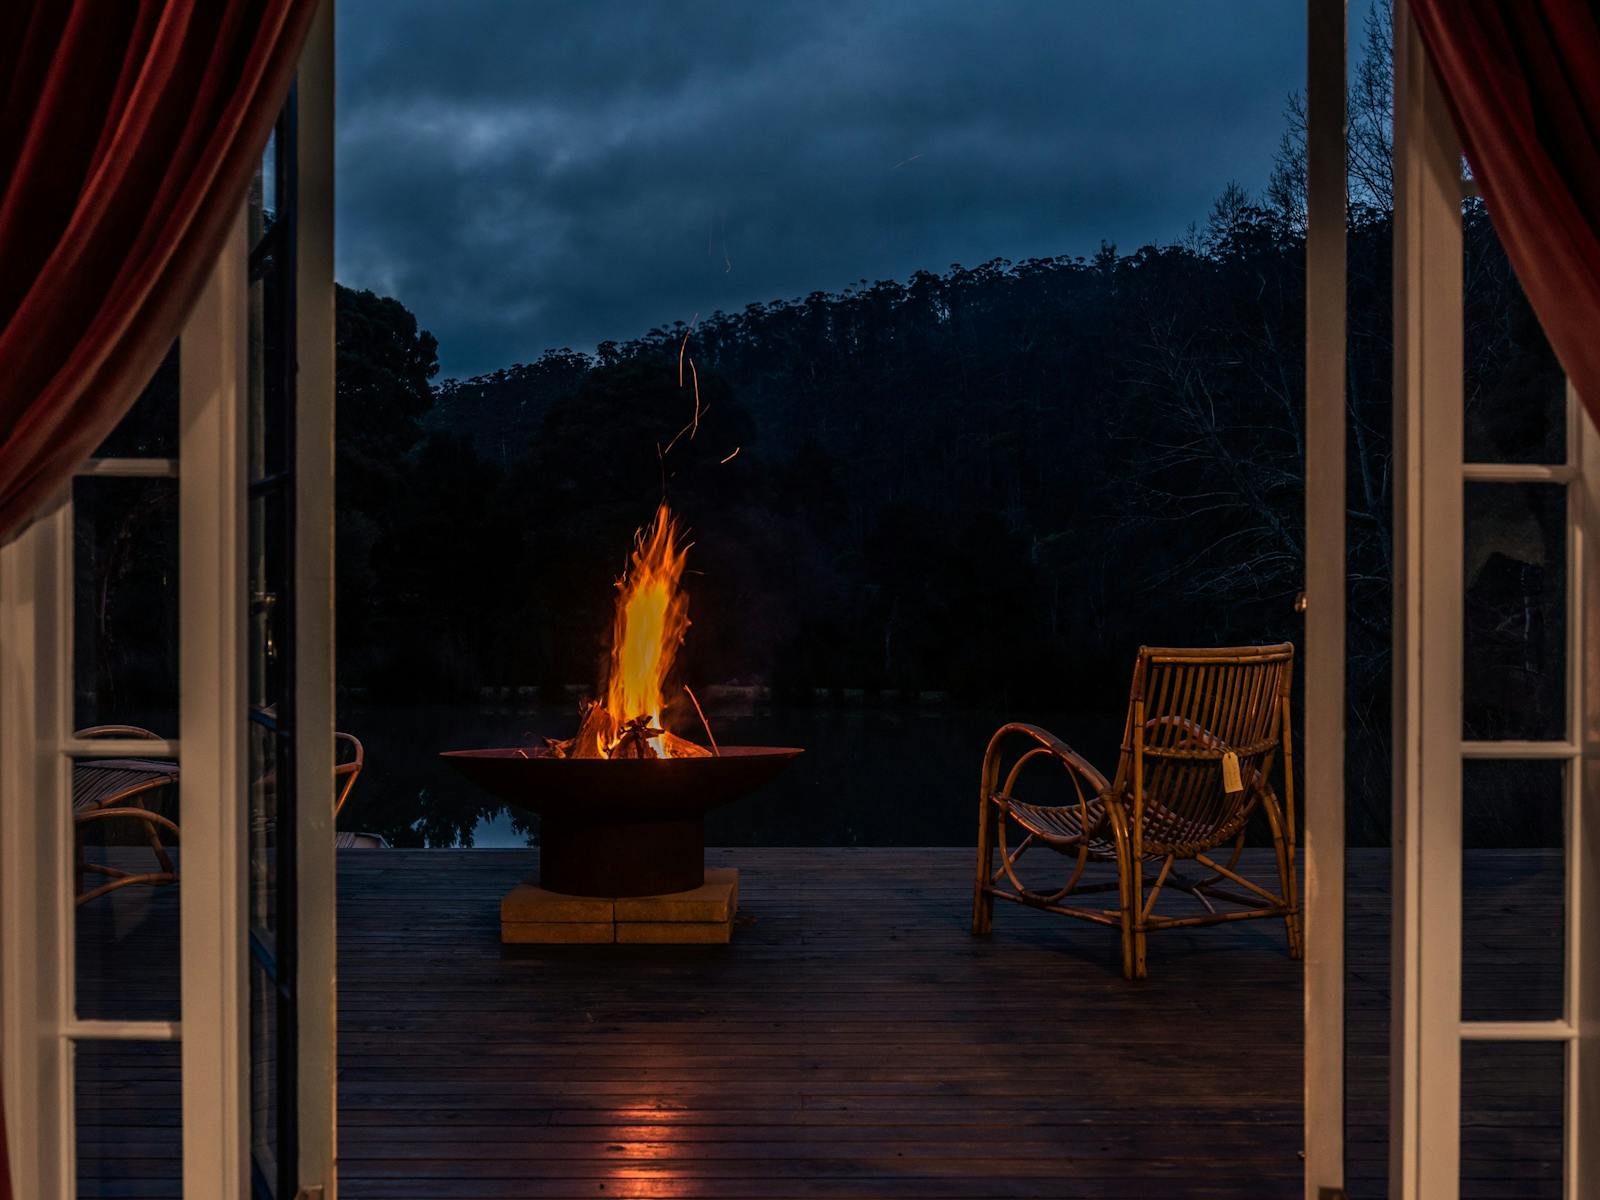 Enjoy the flames from  the fire pit, magical at night under a starry sky